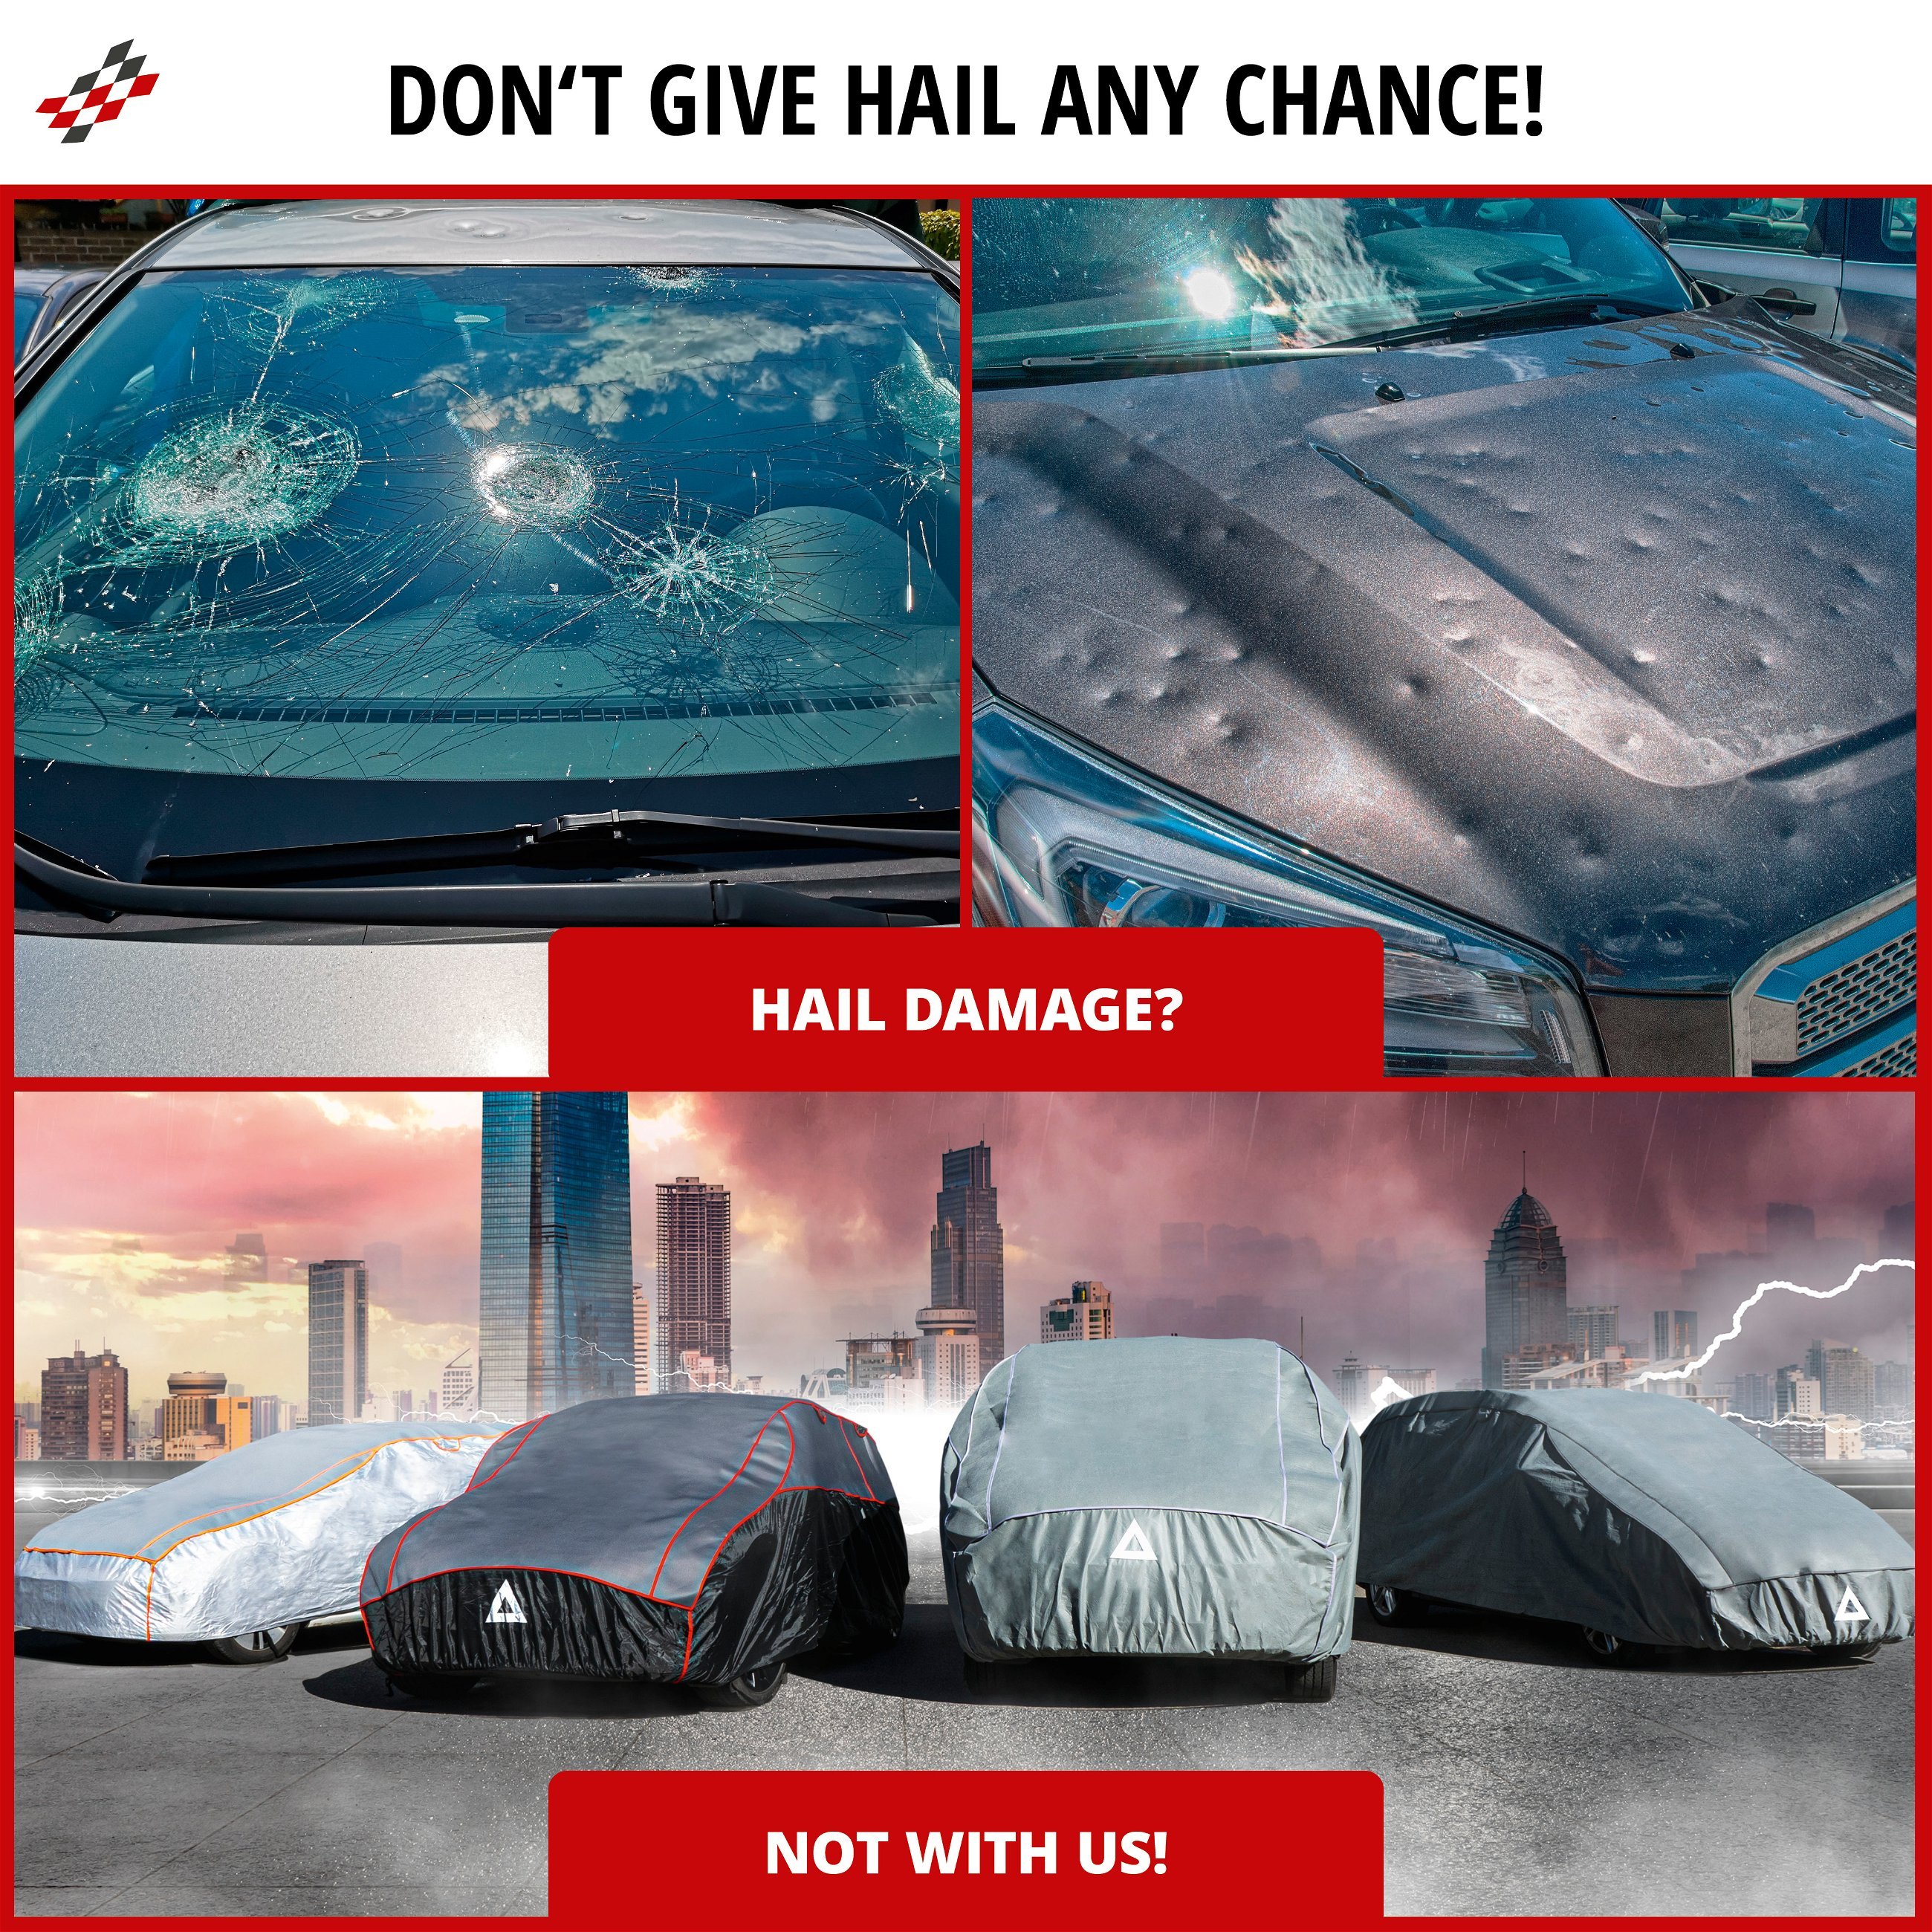 Car hail protection cover Hybrid UV Protect size S